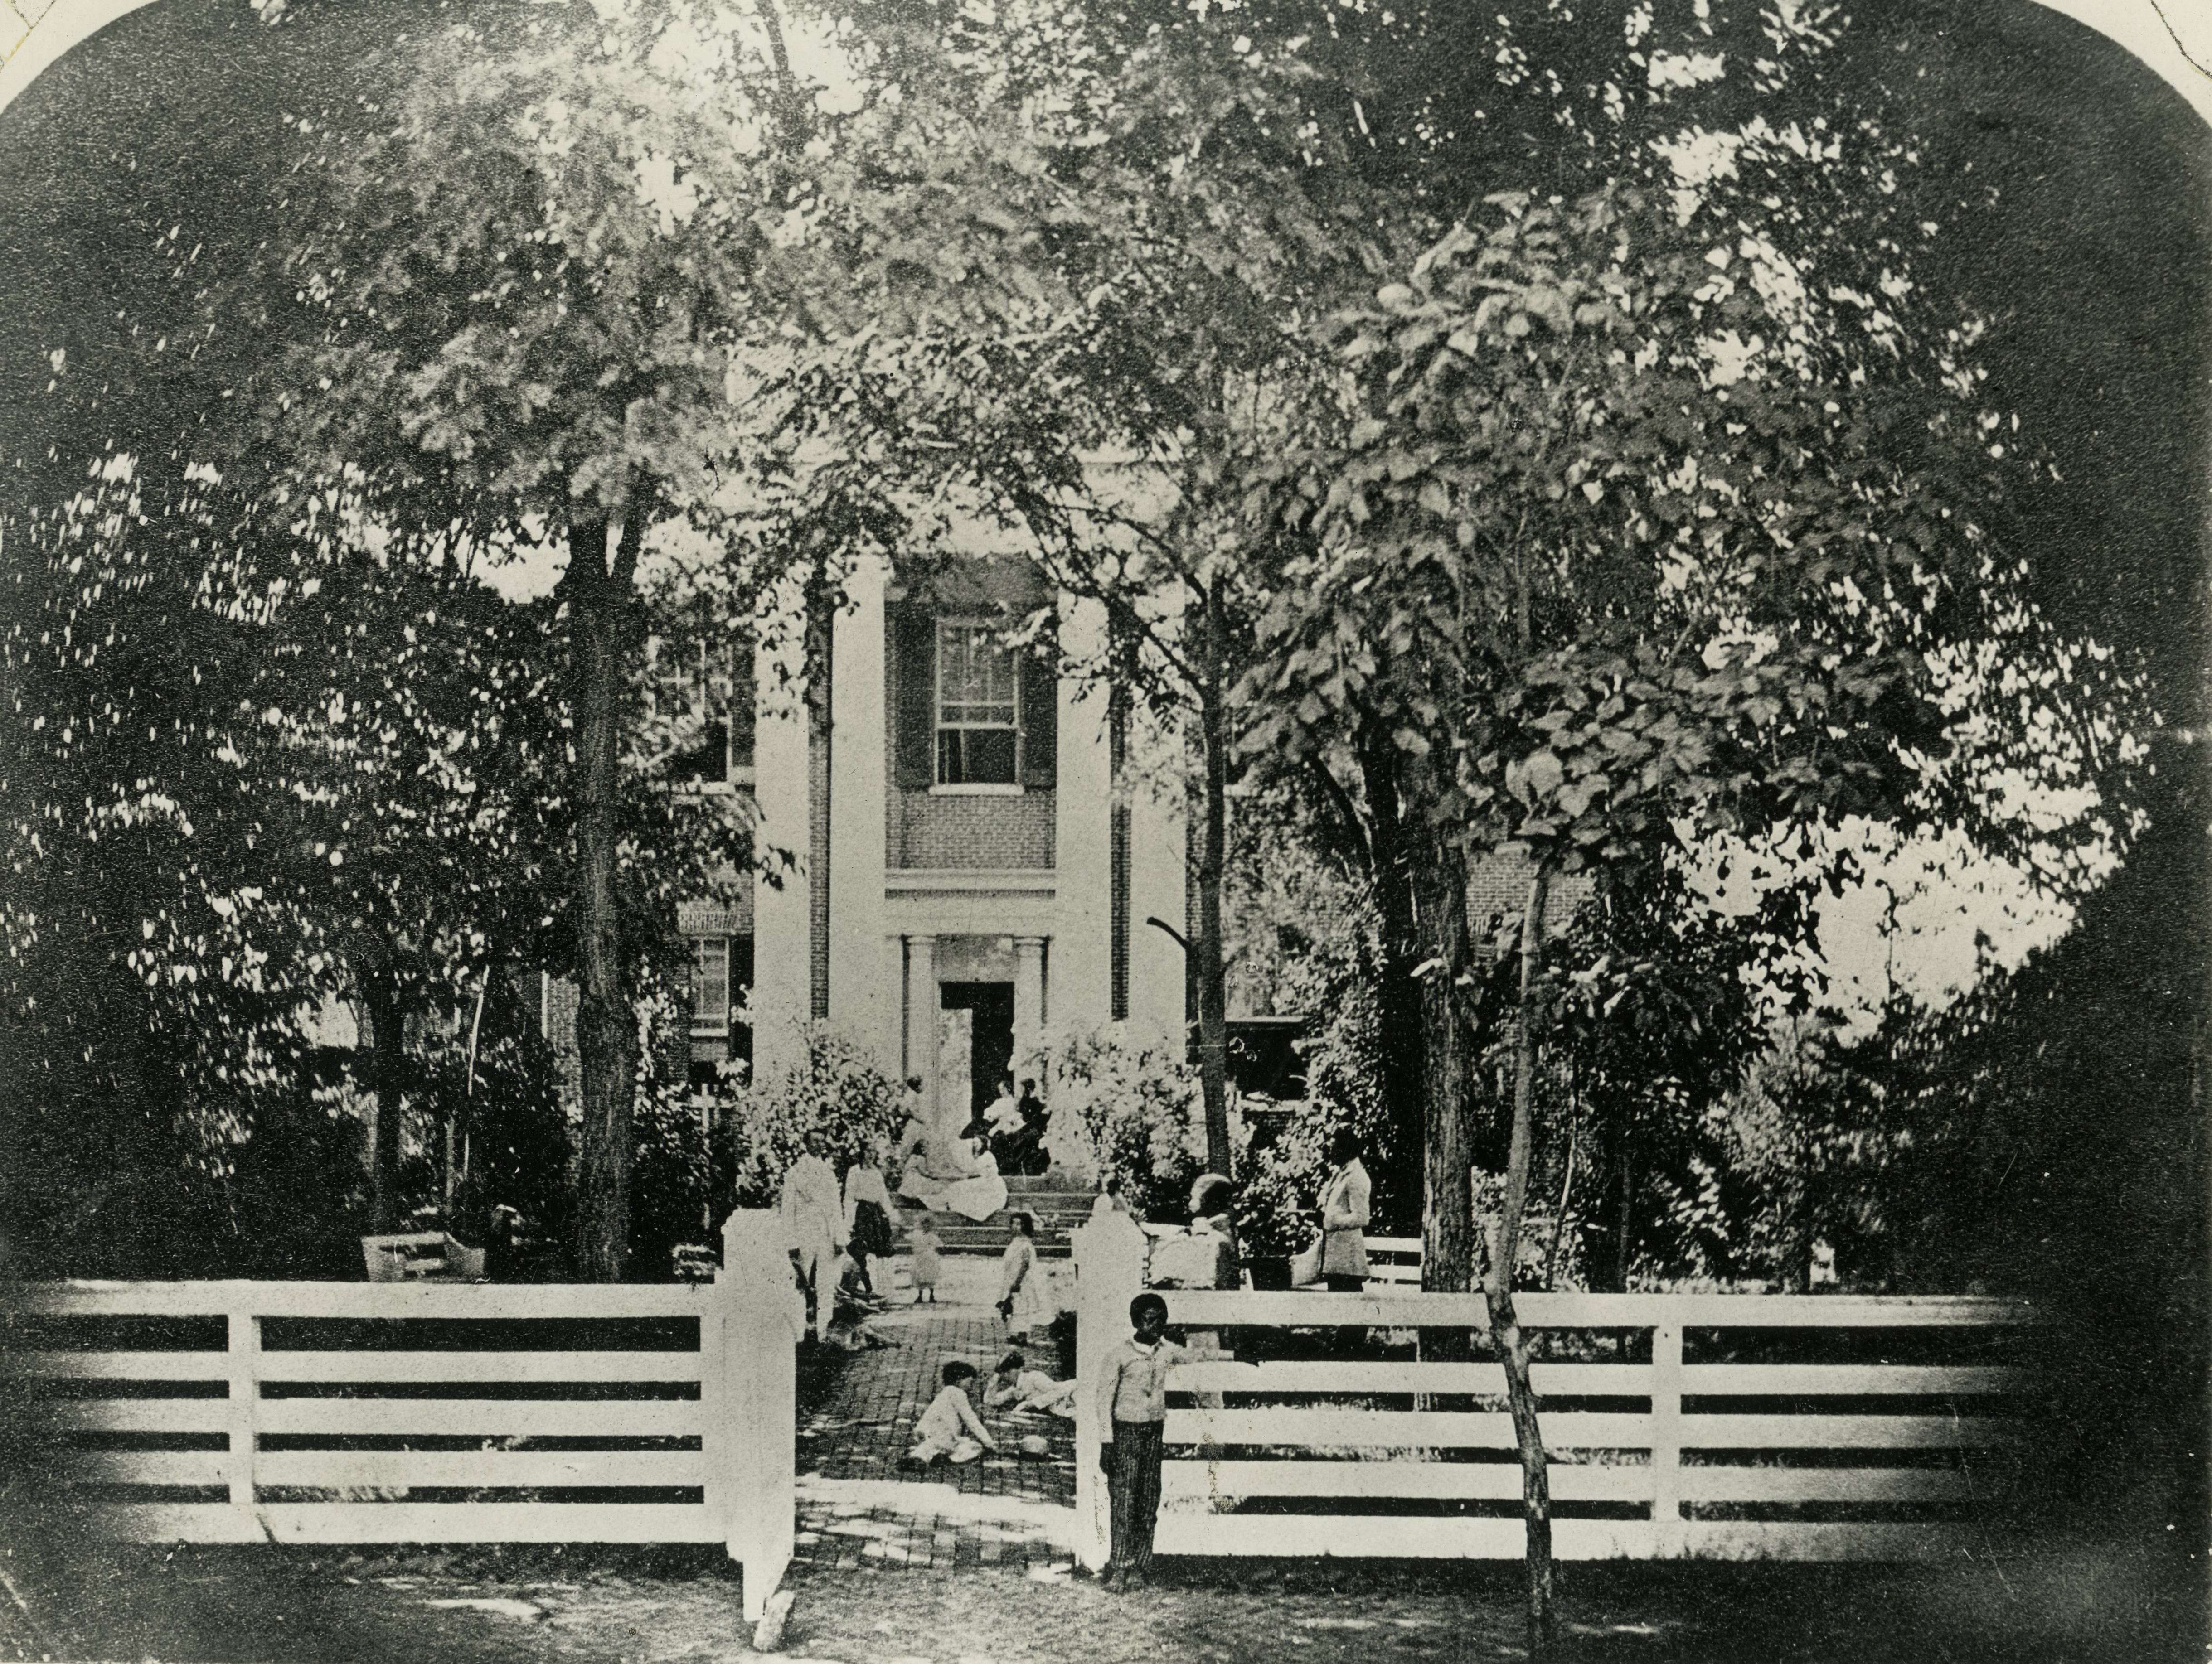 A slave-owning family posing in the front yard of their house with at least three of their slaves visible, Kentucky, c. 1850s